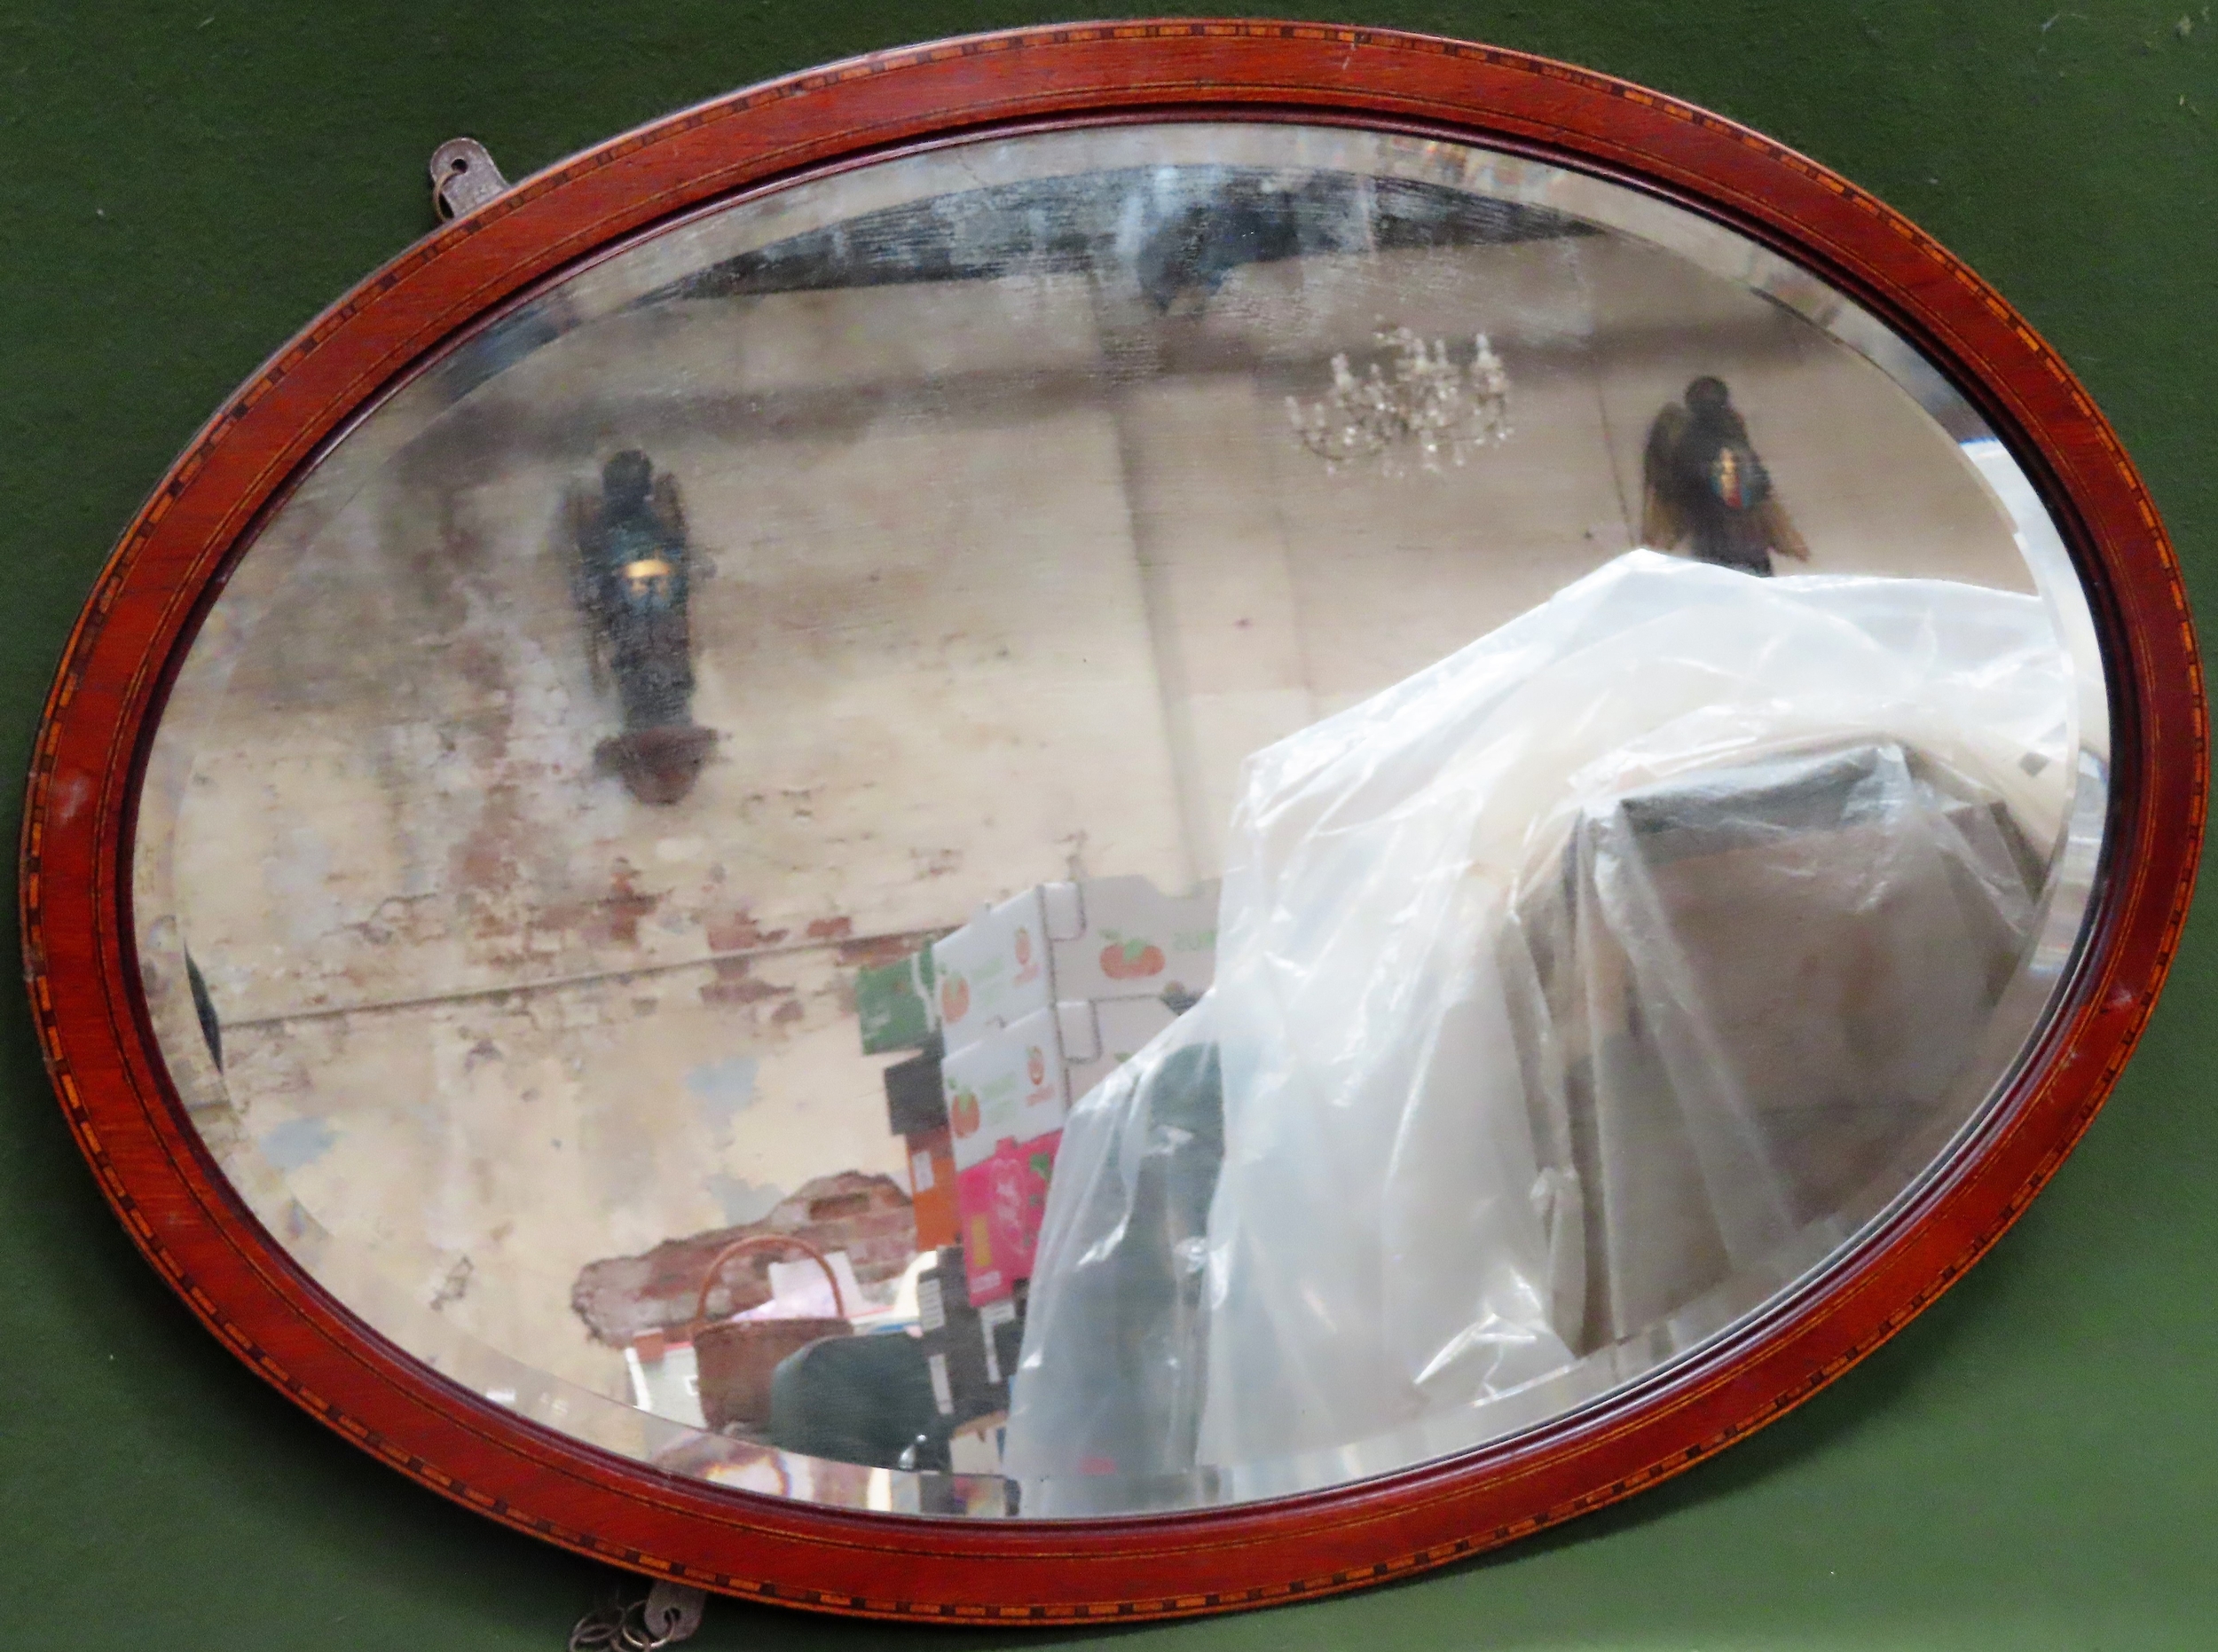 Mahogany bevelled and inlaid oval wall mirror. App. 57 x 82cm Appears in reasonable used condition